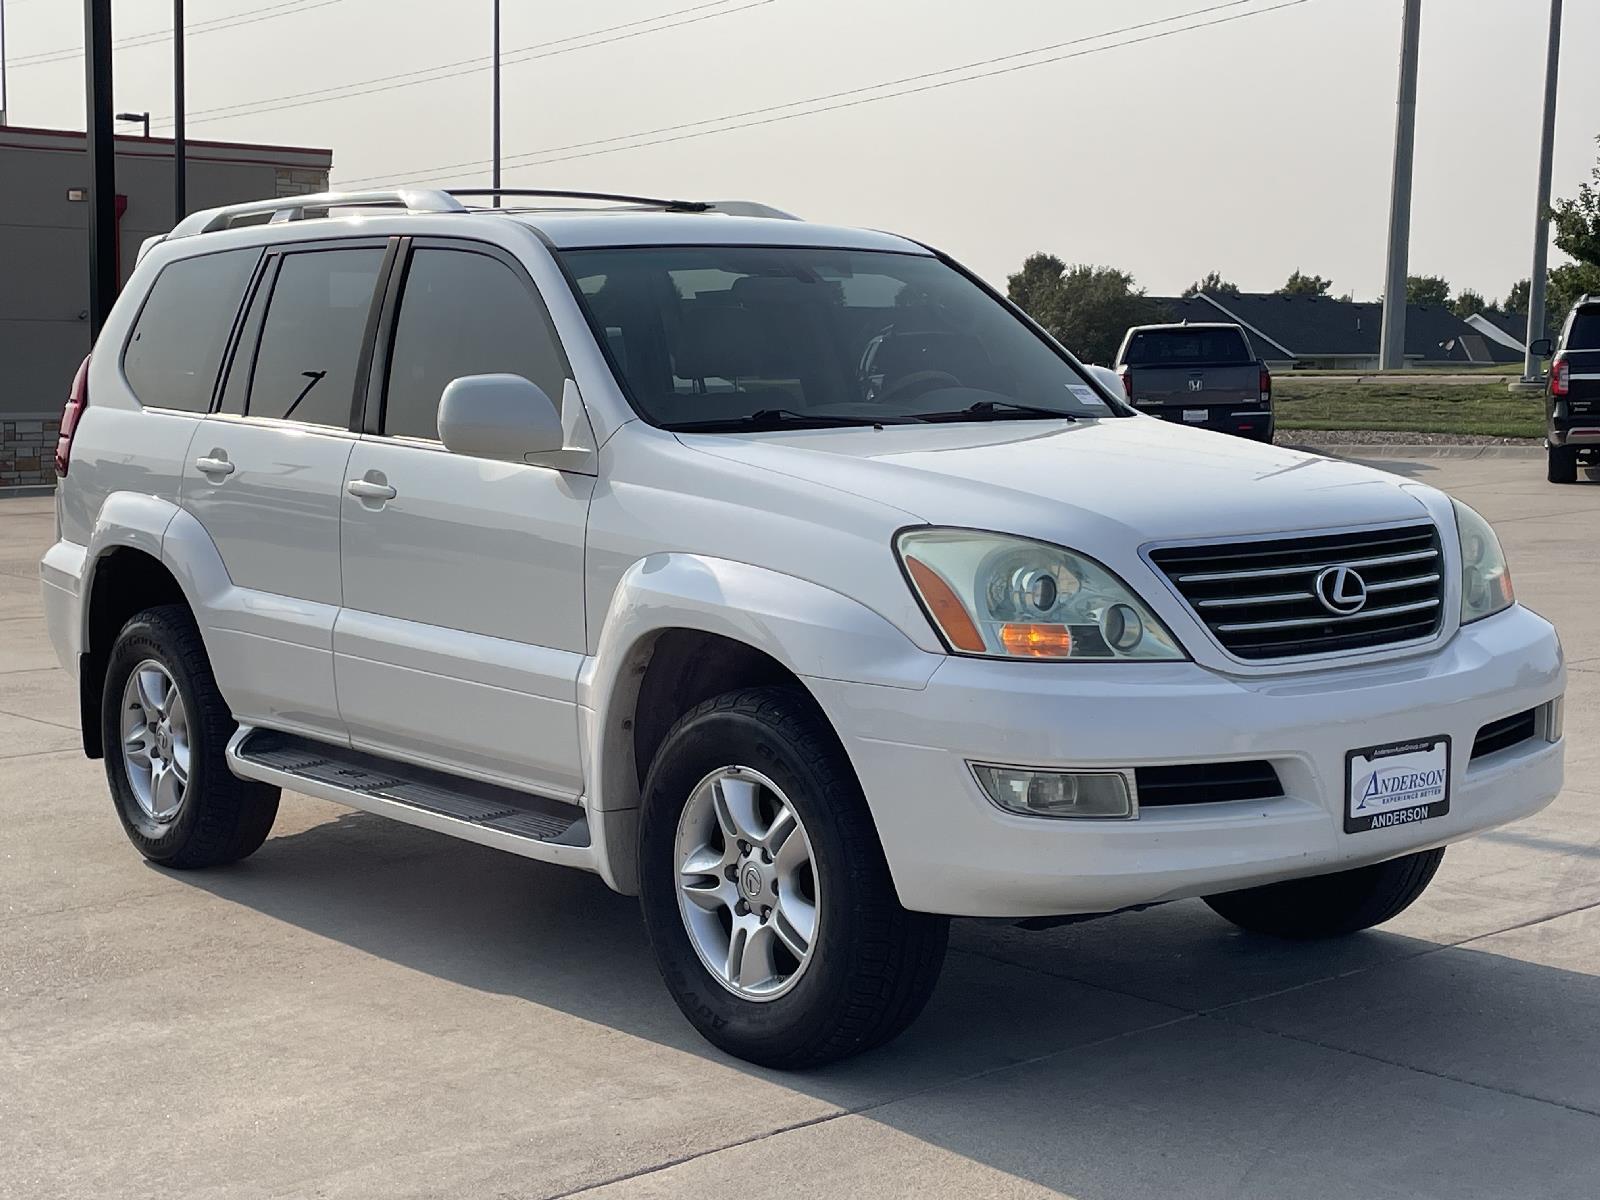 Used 2006 Lexus GX 470  SUV for sale in Lincoln NE